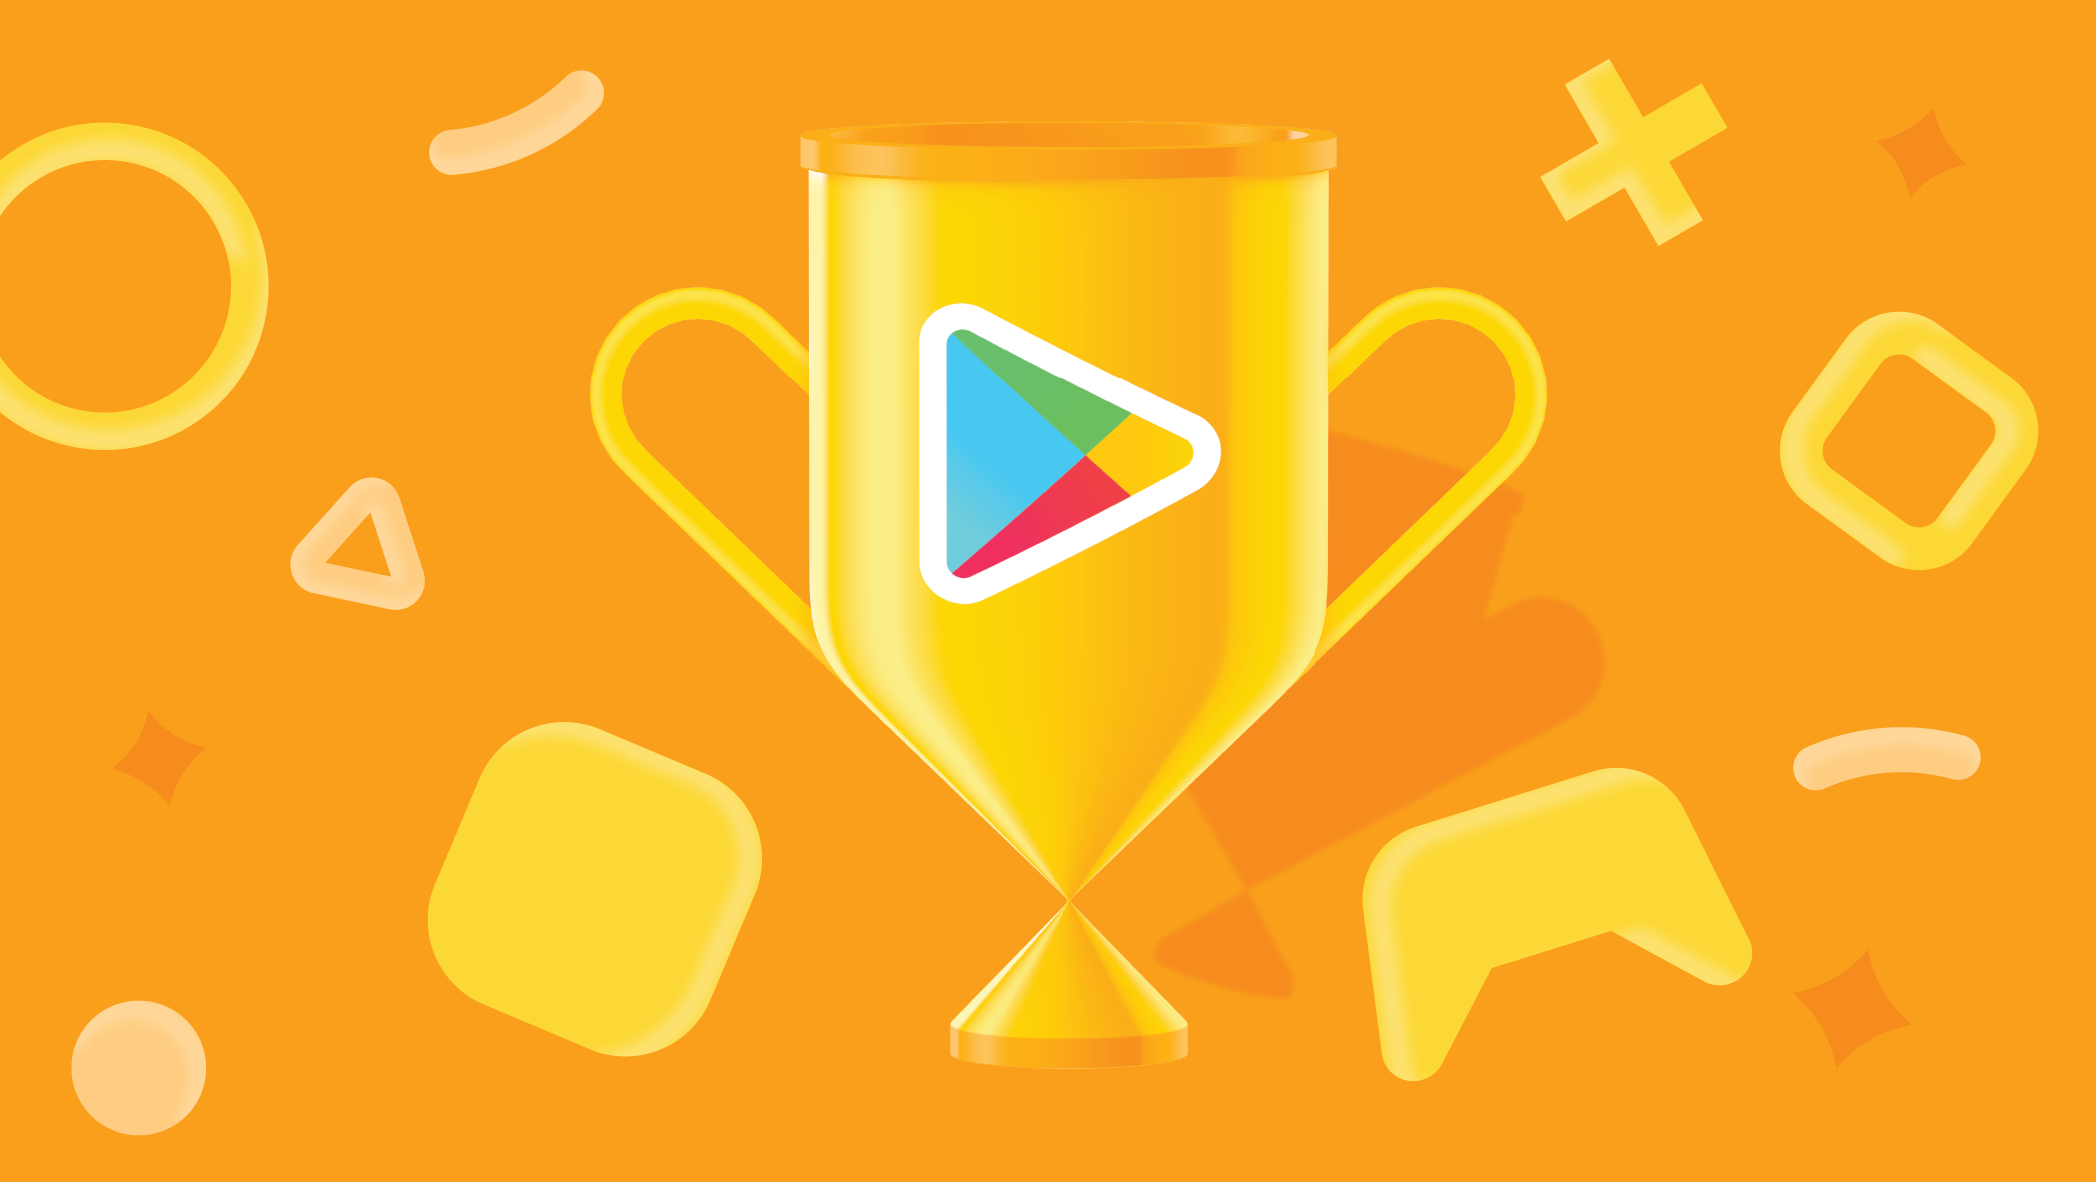 This Week in Apps: Apple and Google’s best apps of the year, Amazon Appstore fails, Twitter’s new CEO